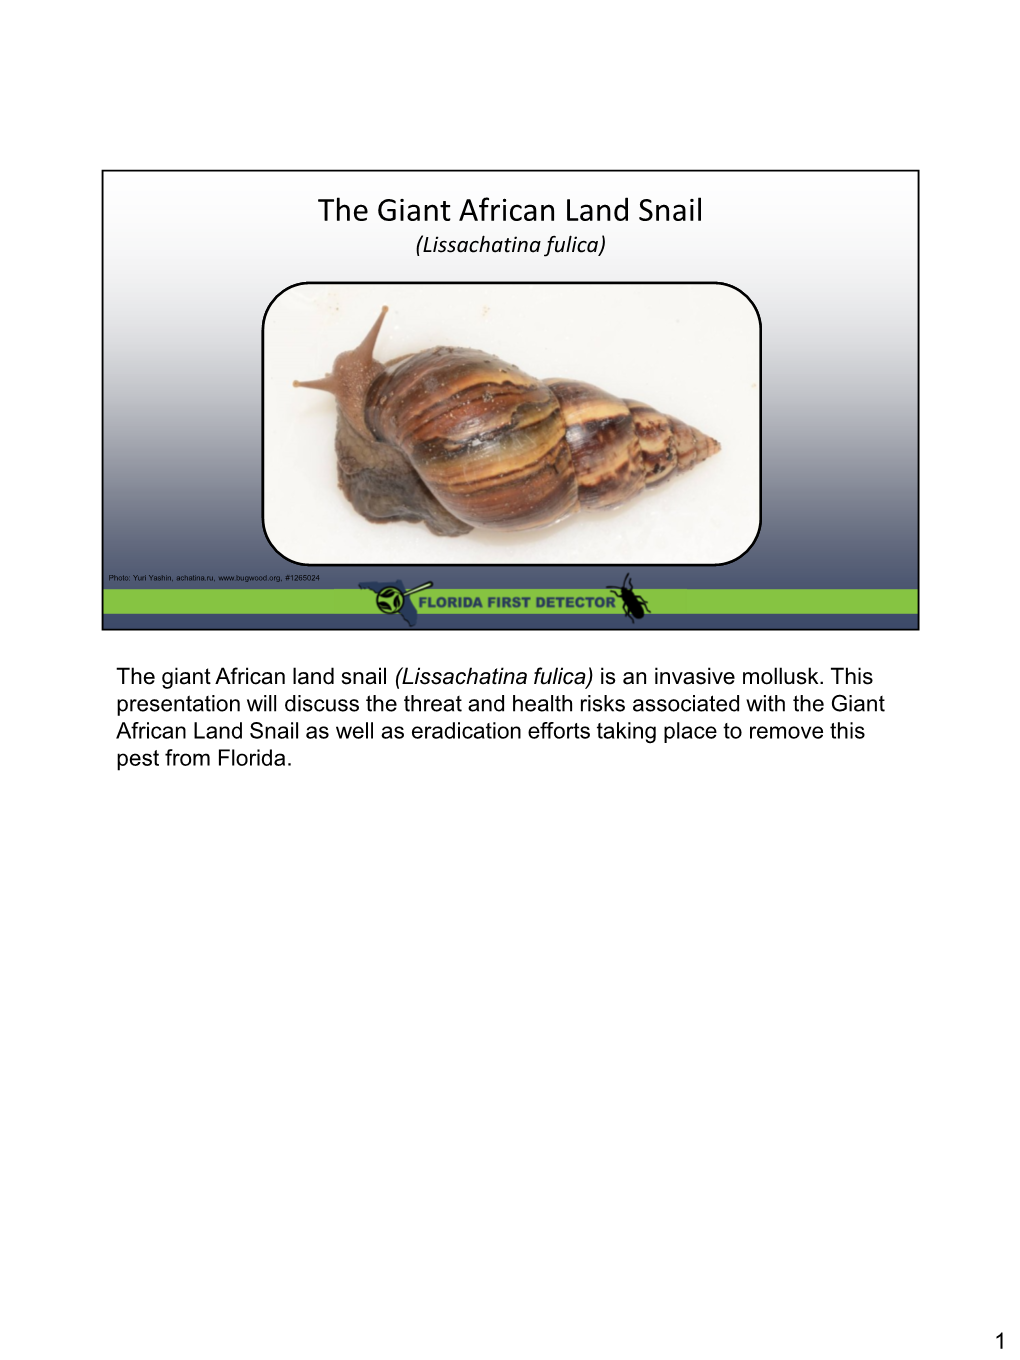 The Giant African Land Snail (Lissachatina Fulica)